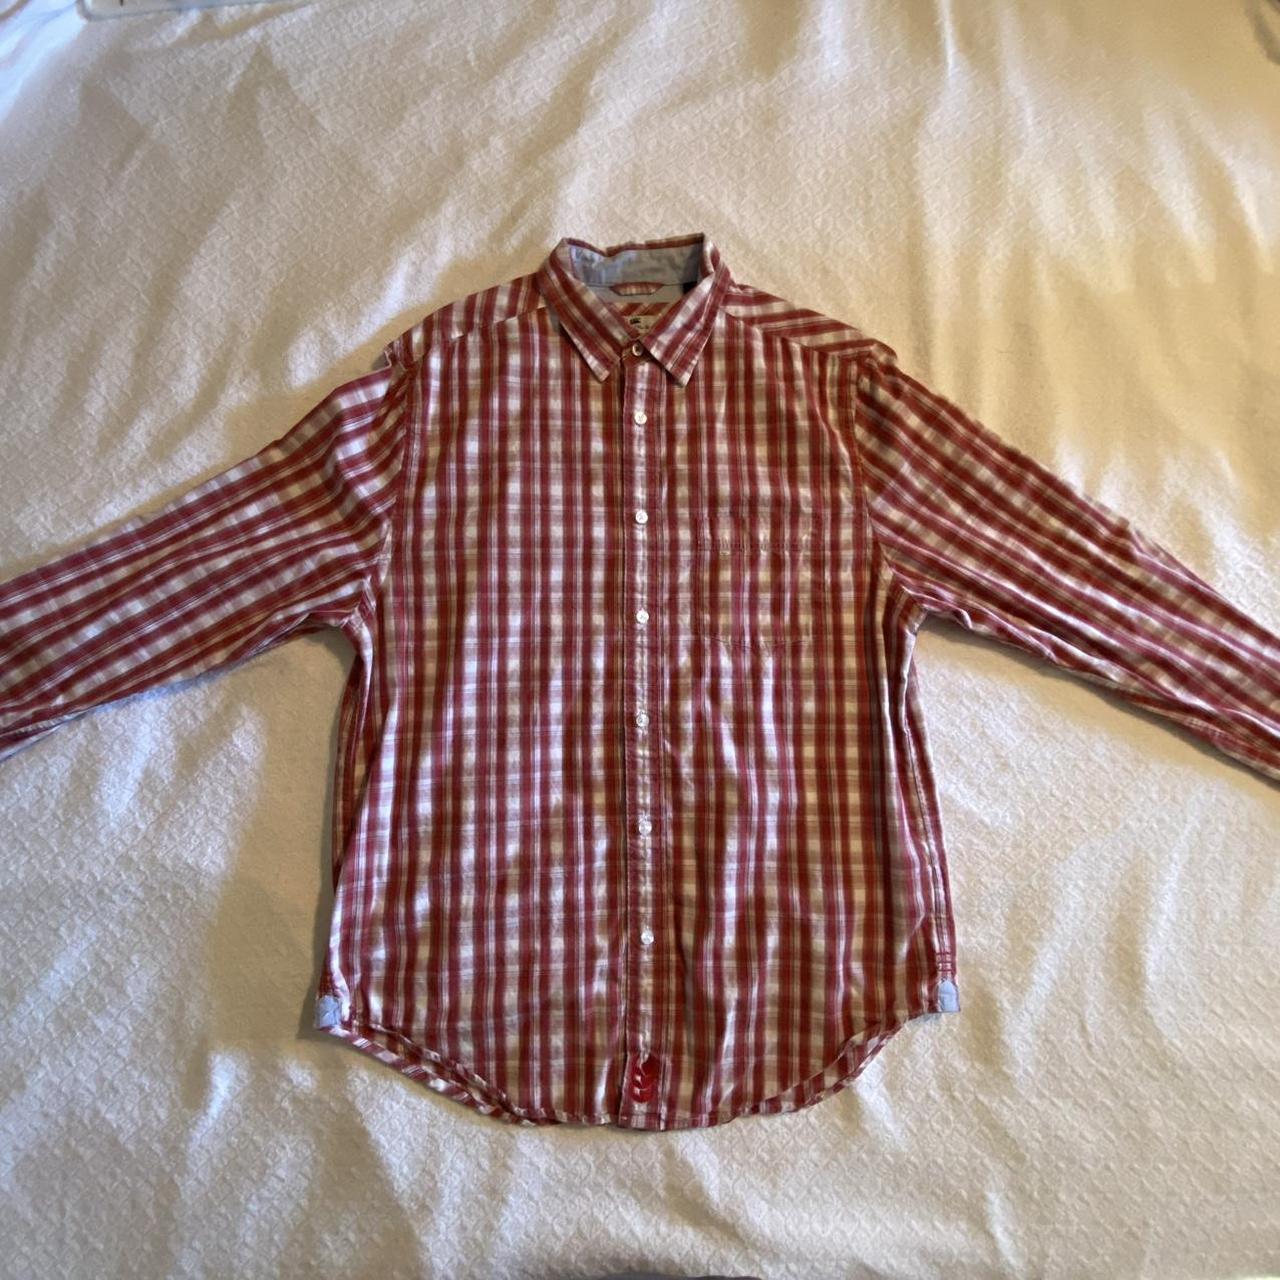 item listed by norcalvtg